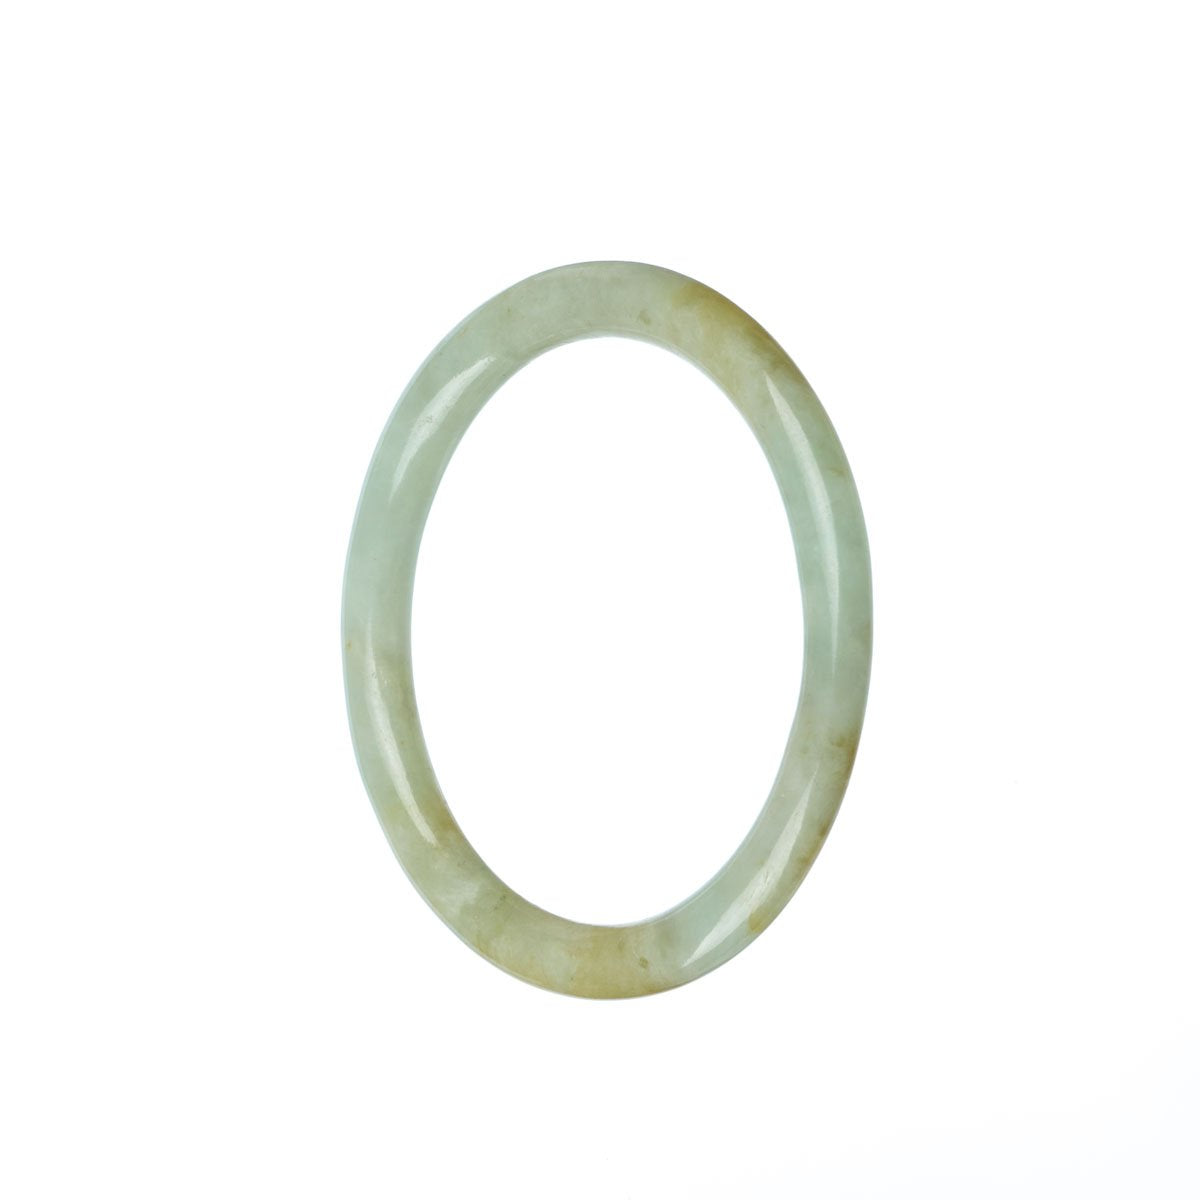 A small, round green jade bangle bracelet with high quality grade A jade. Perfect for those who prefer a petite and traditional style.